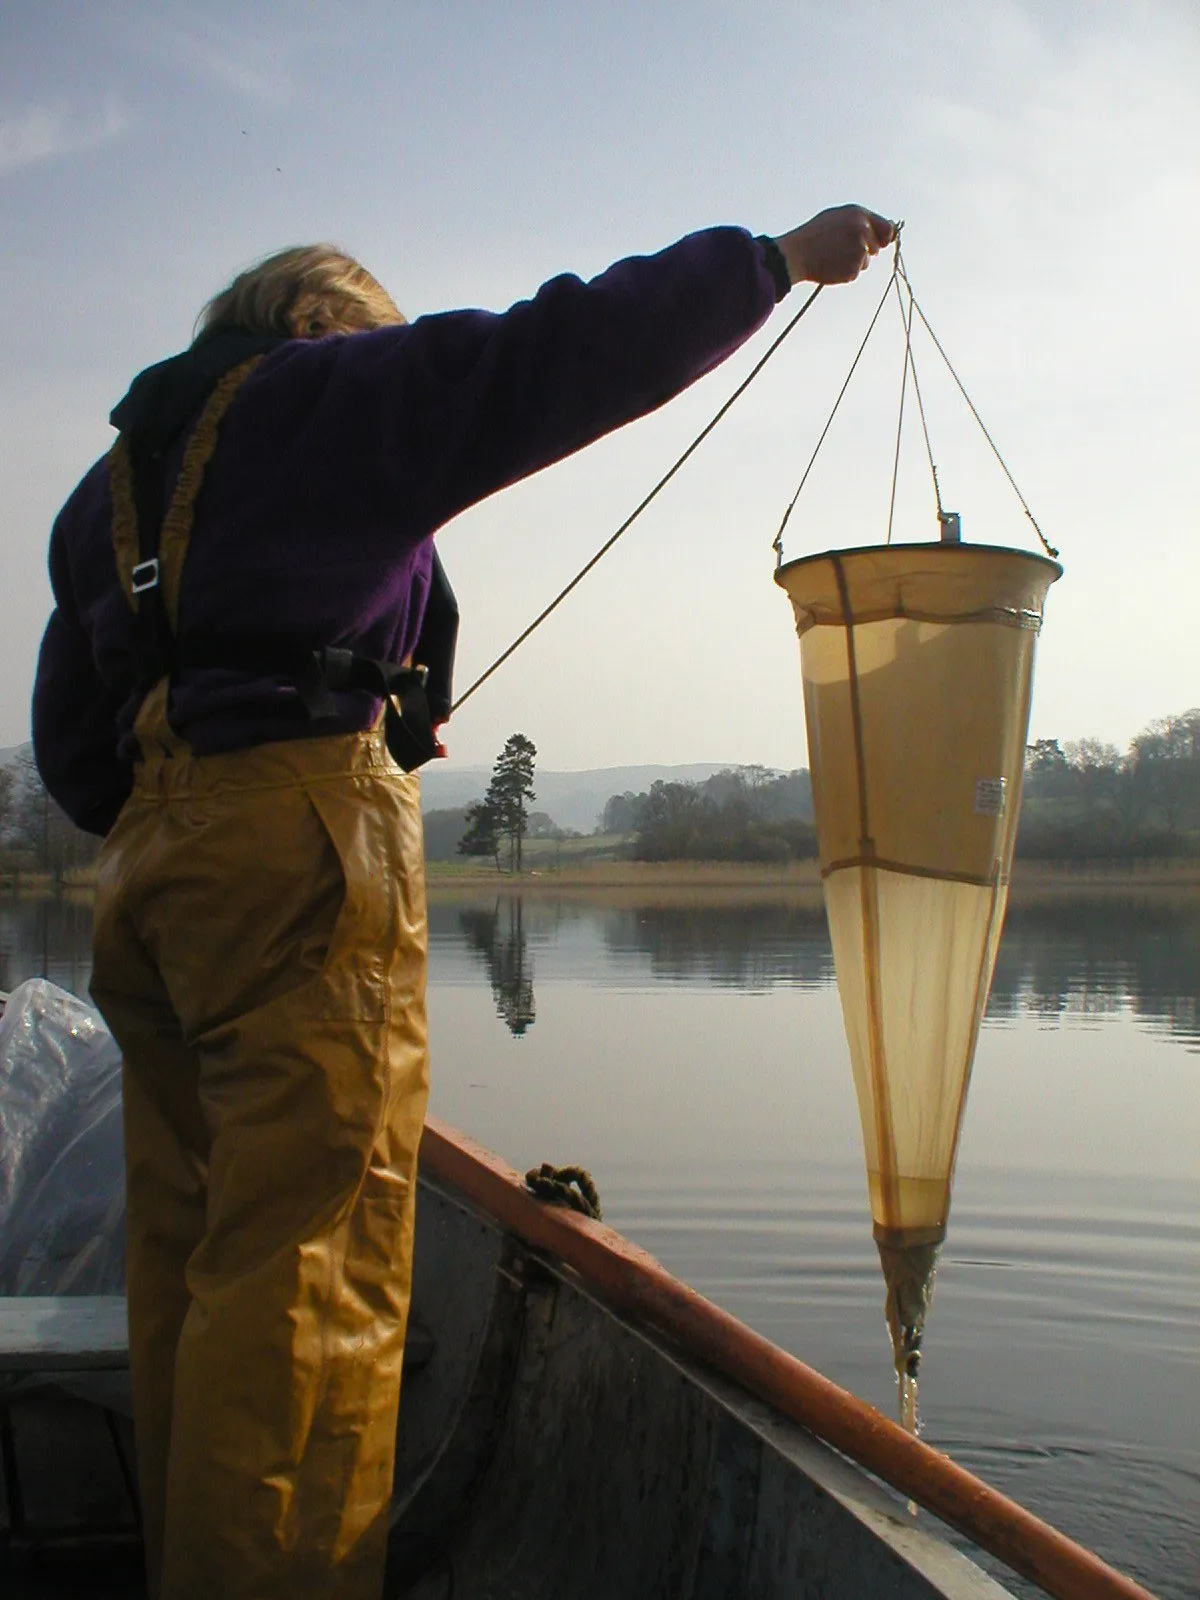 One of the team collecting samples from the Lake.